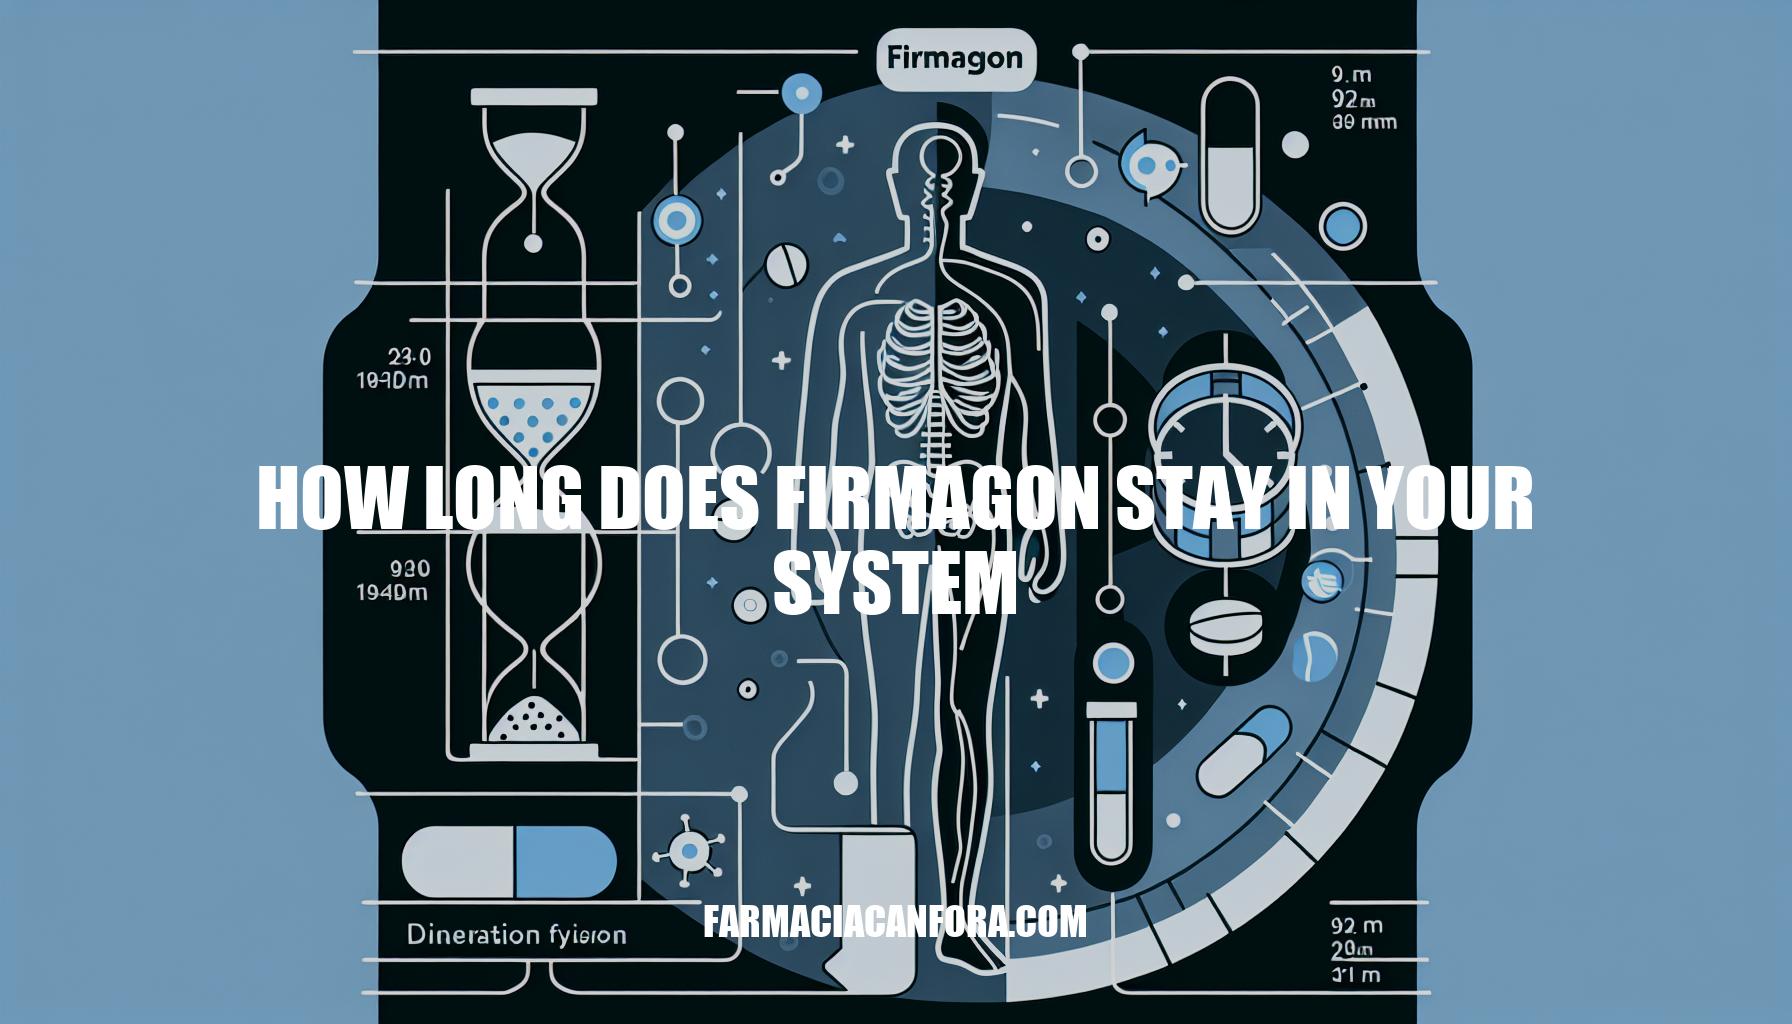 How Long Does Firmagon Stay in Your System